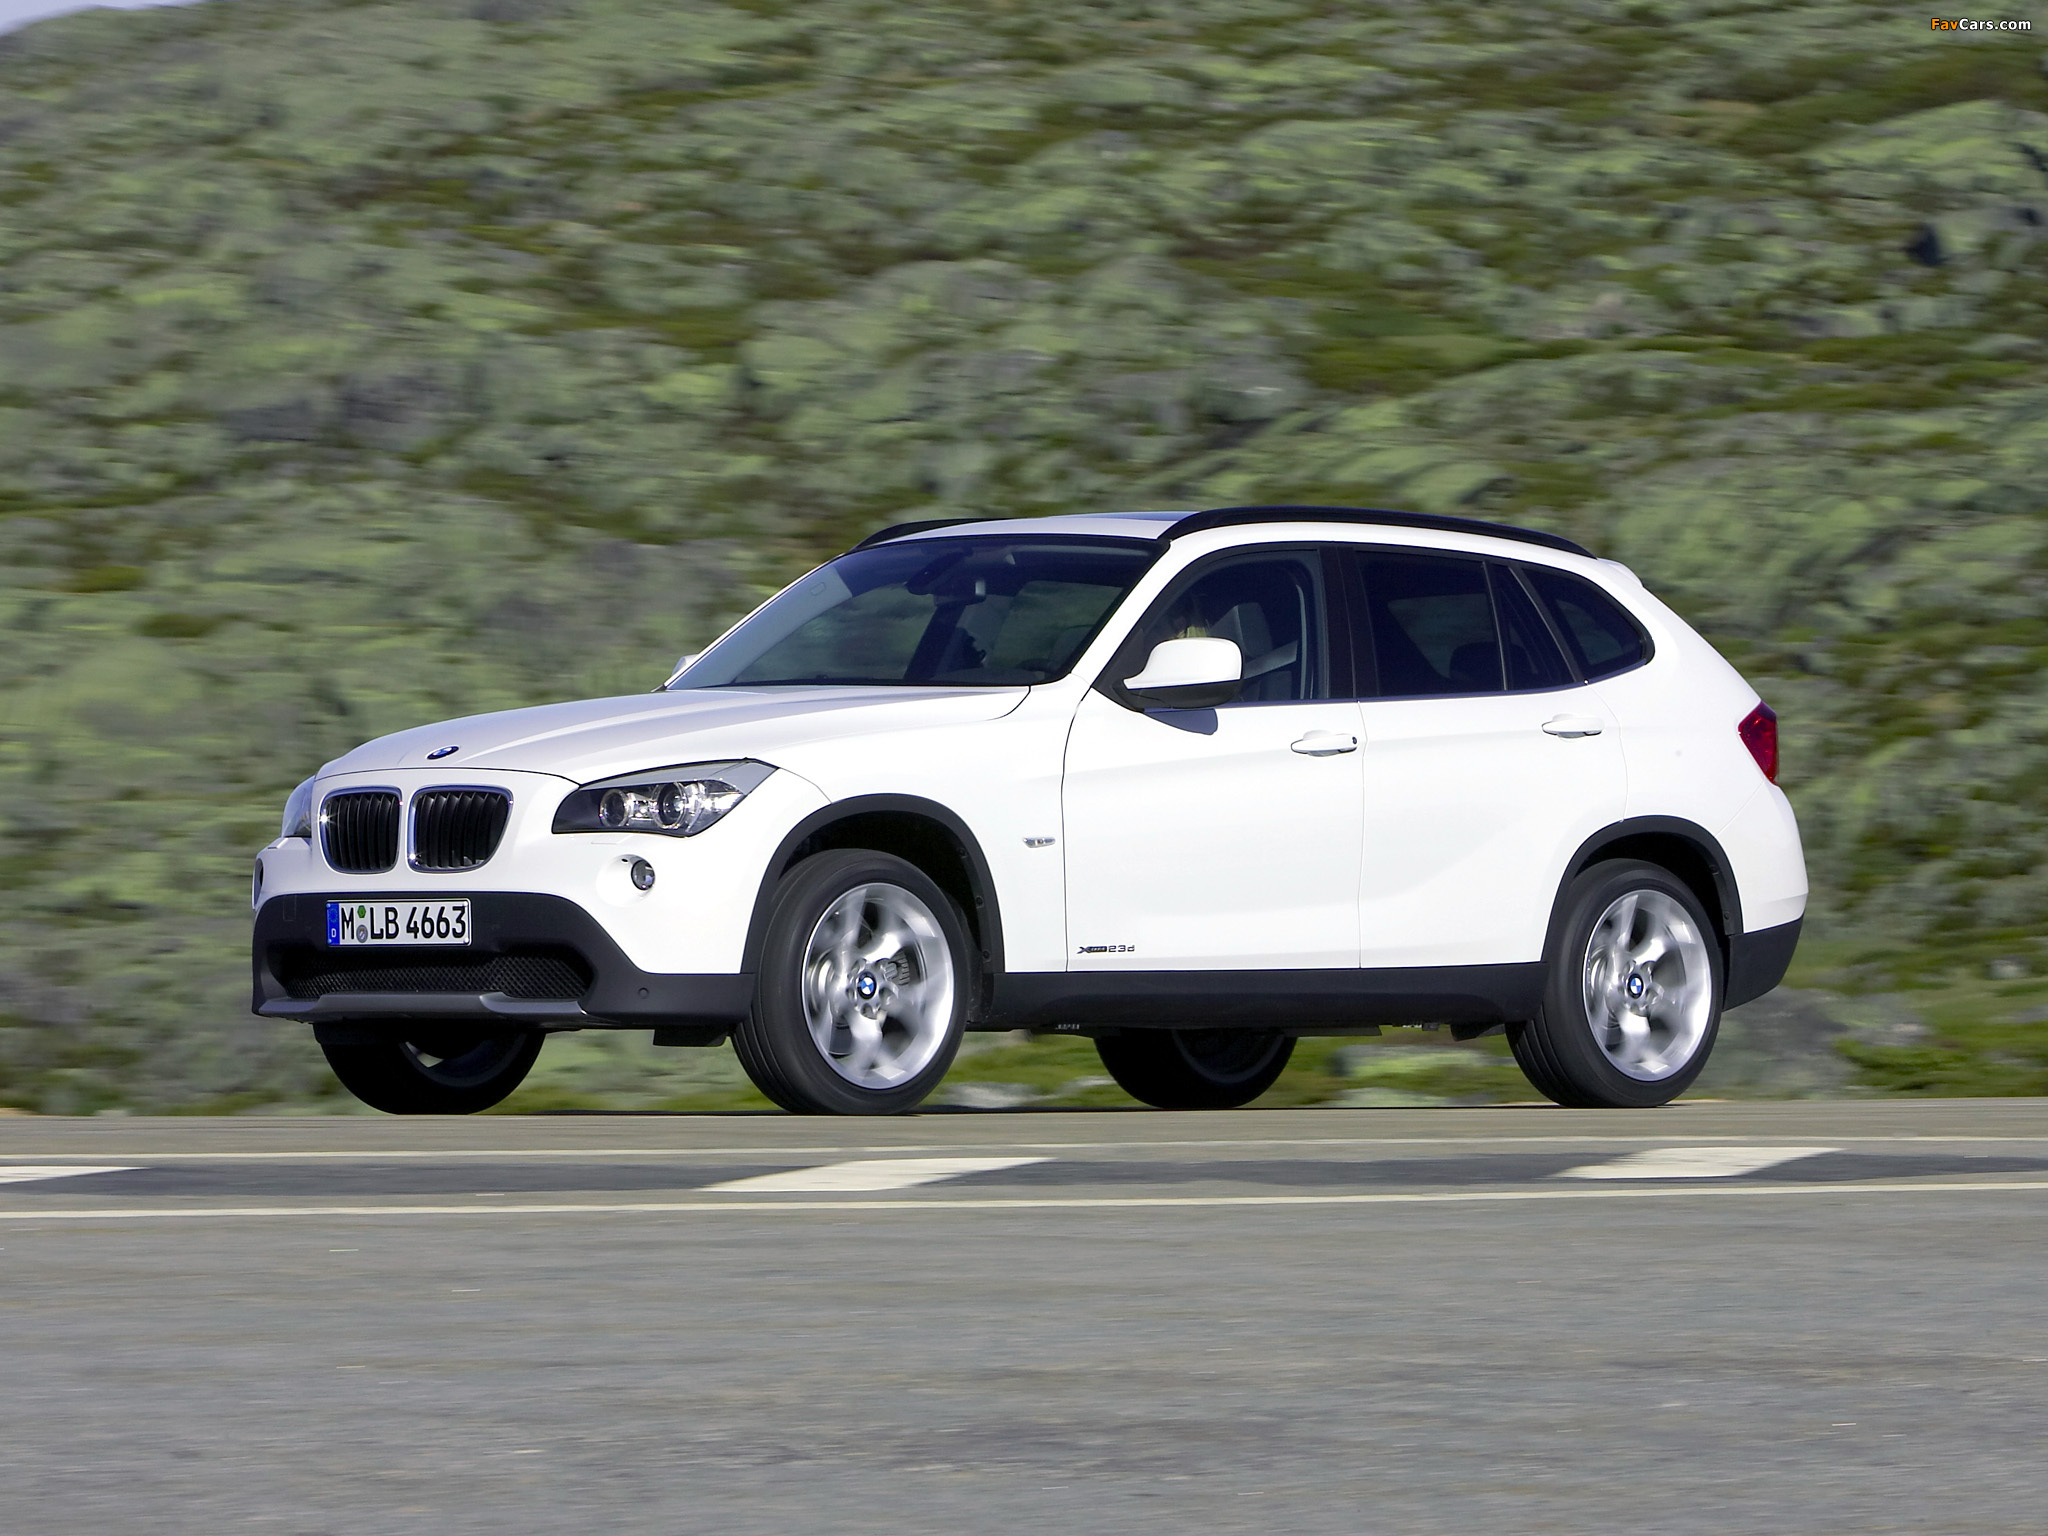 Images of BMW X1 xDrive23d (E84) 2009 (2048x1536)